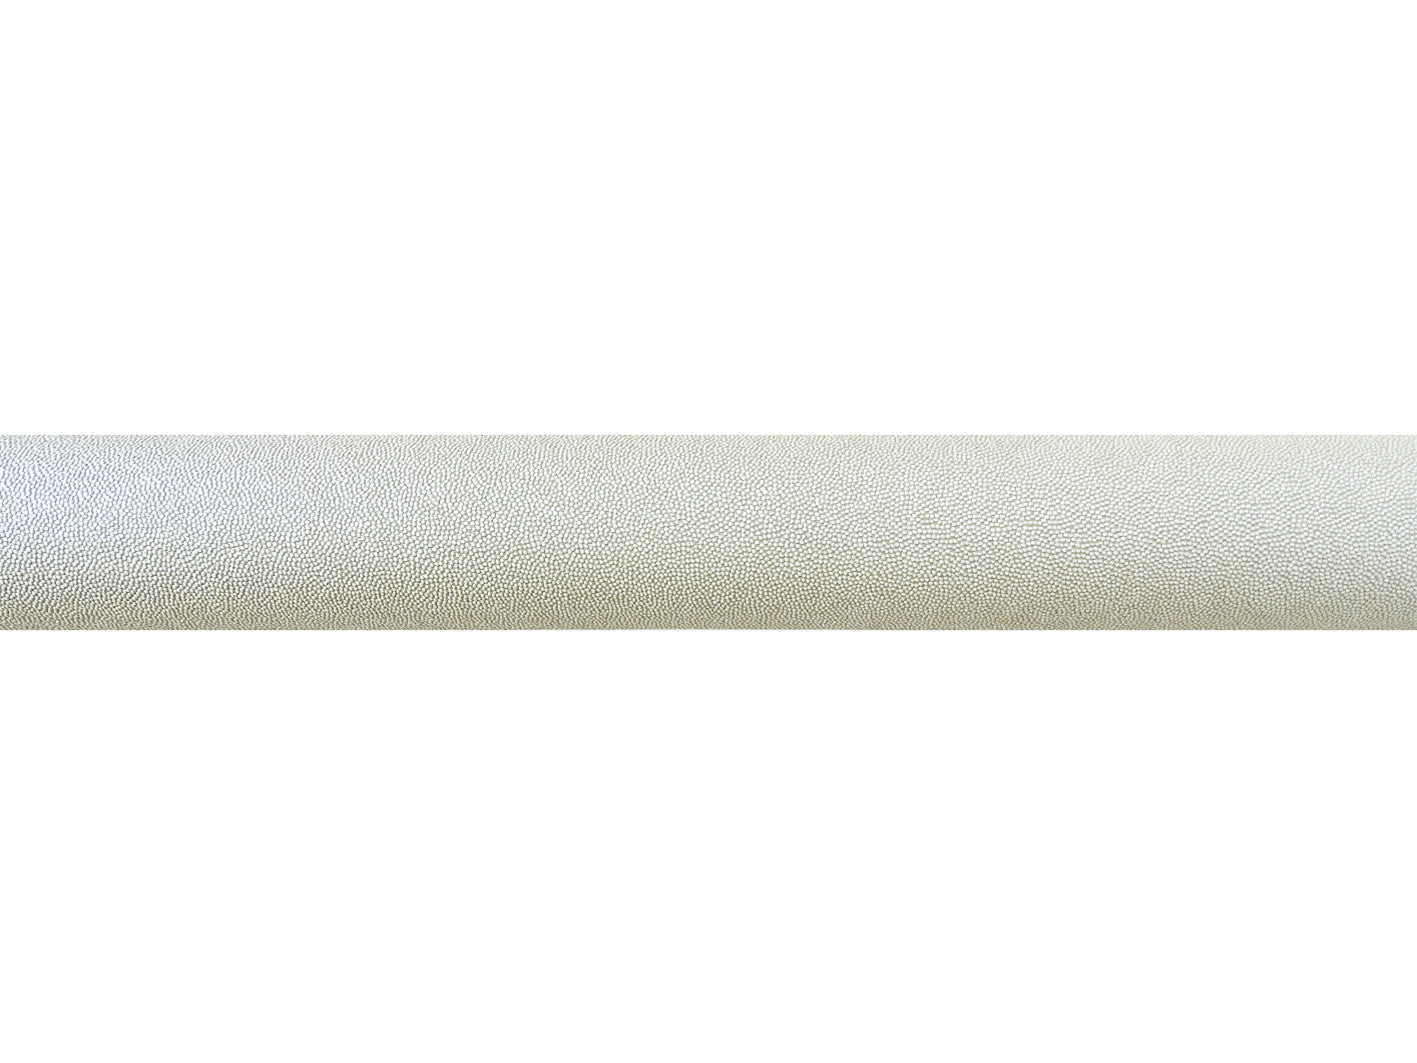 shagreen textured white pepper tracked curtain pole silver track by Walcot House